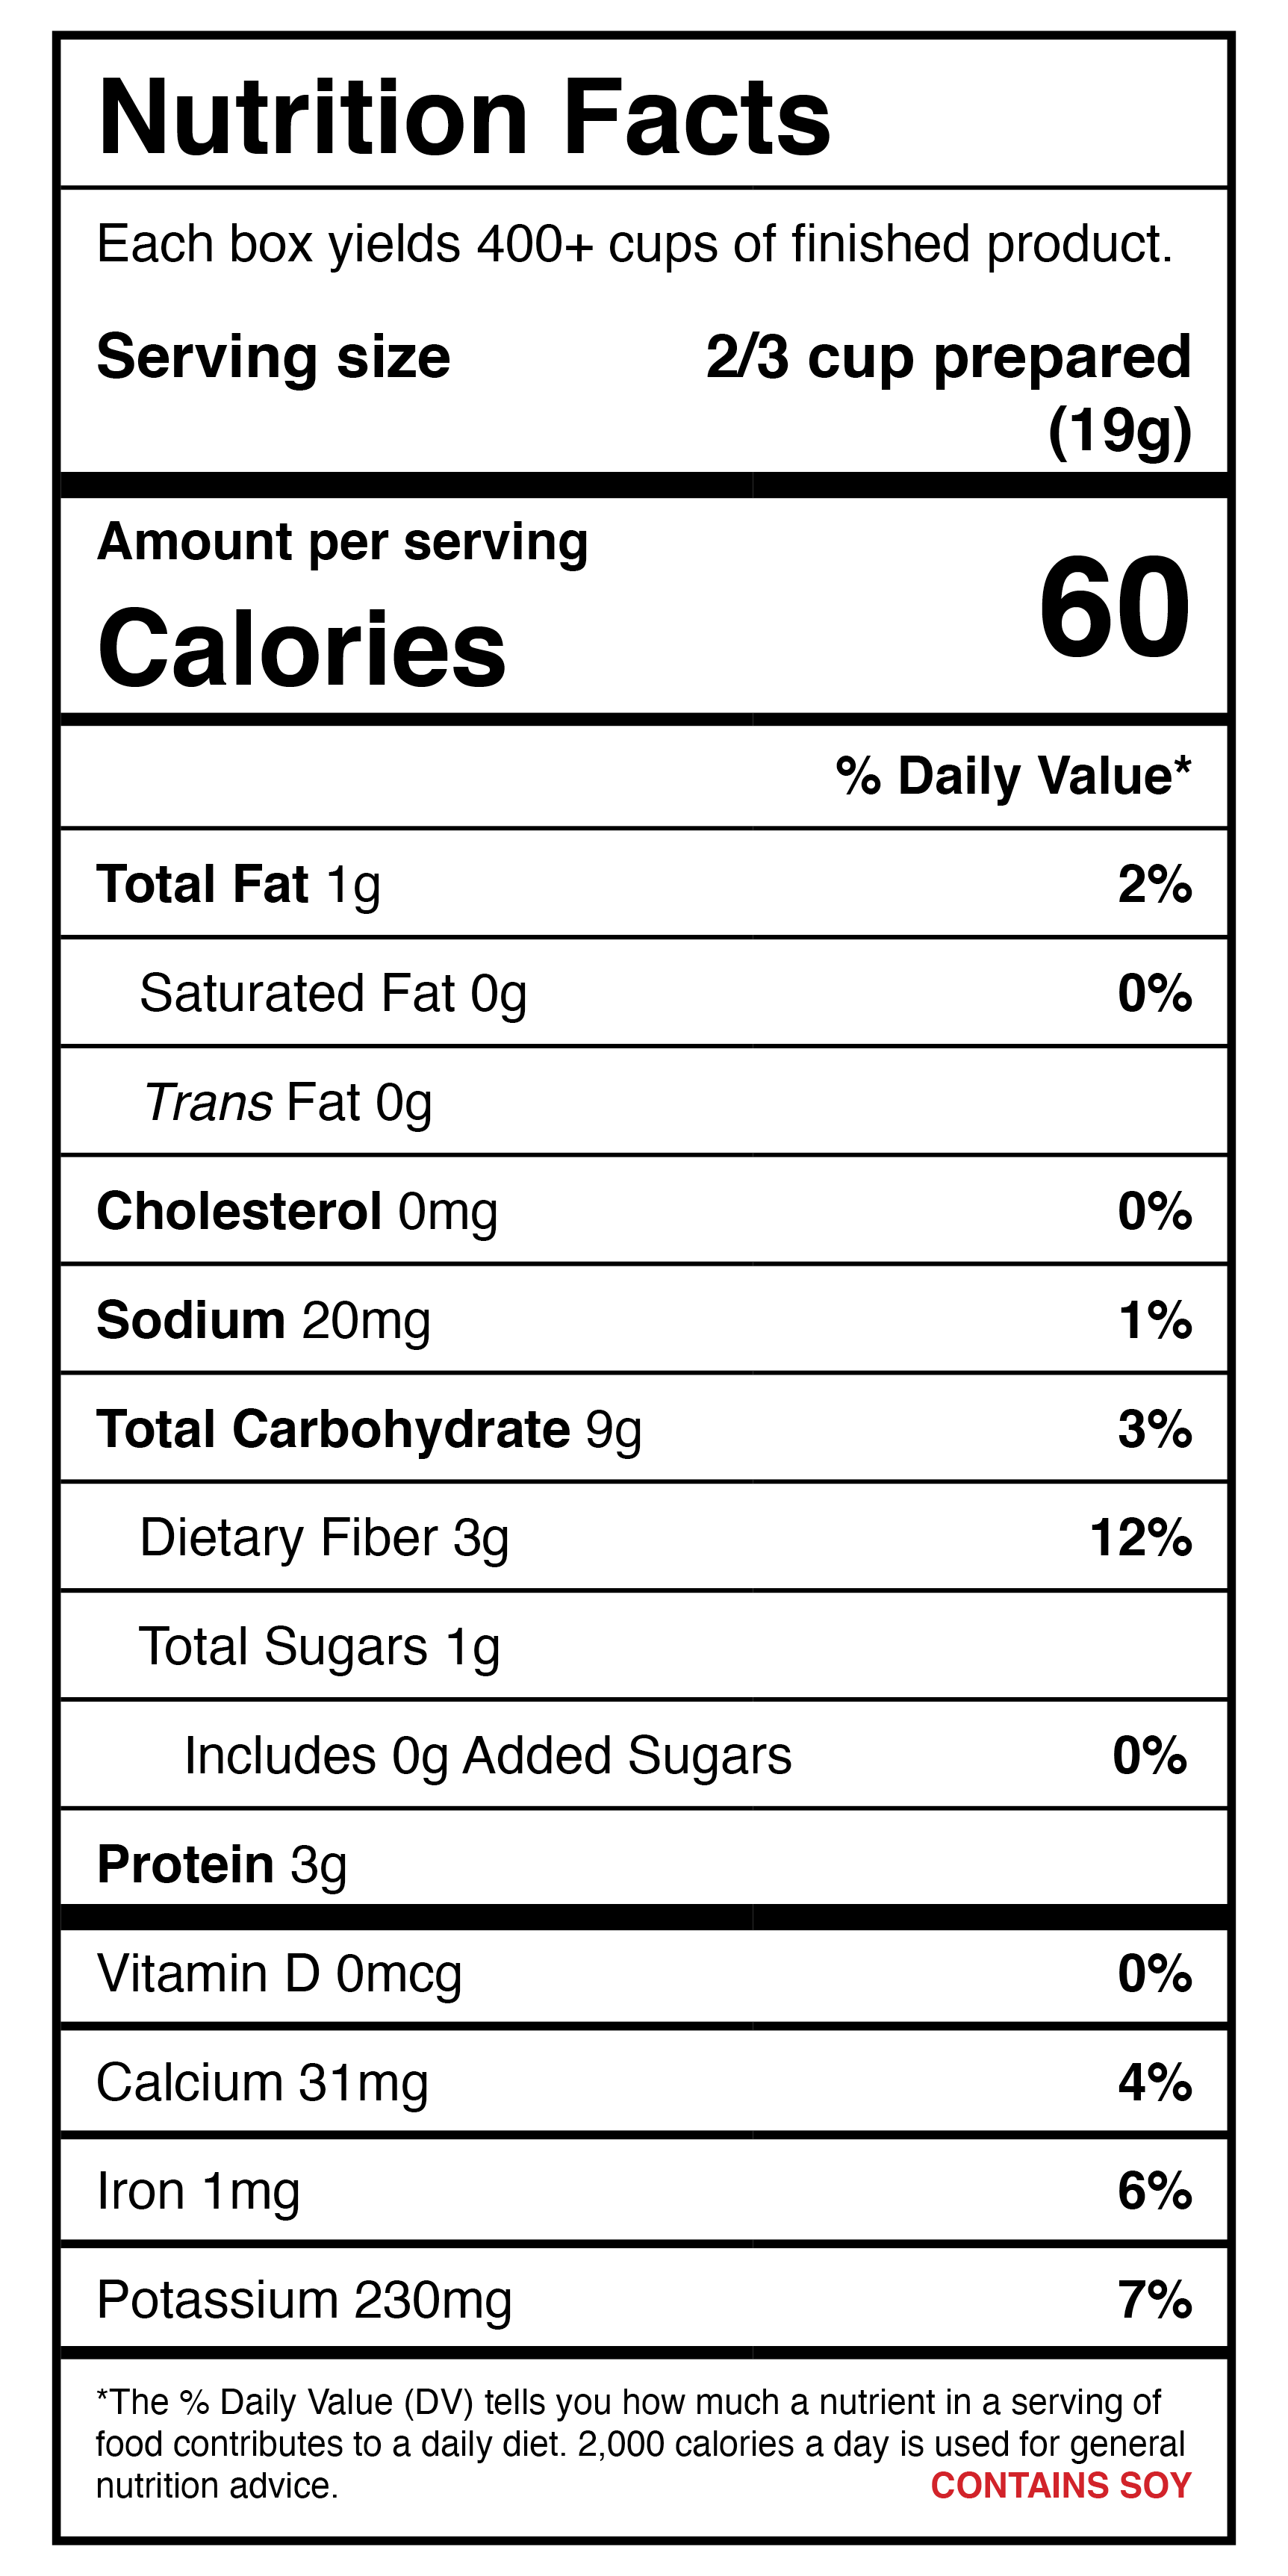 A nutrition label showing the nutrition facts of a Harmony House Navy Bean Soup Mix.